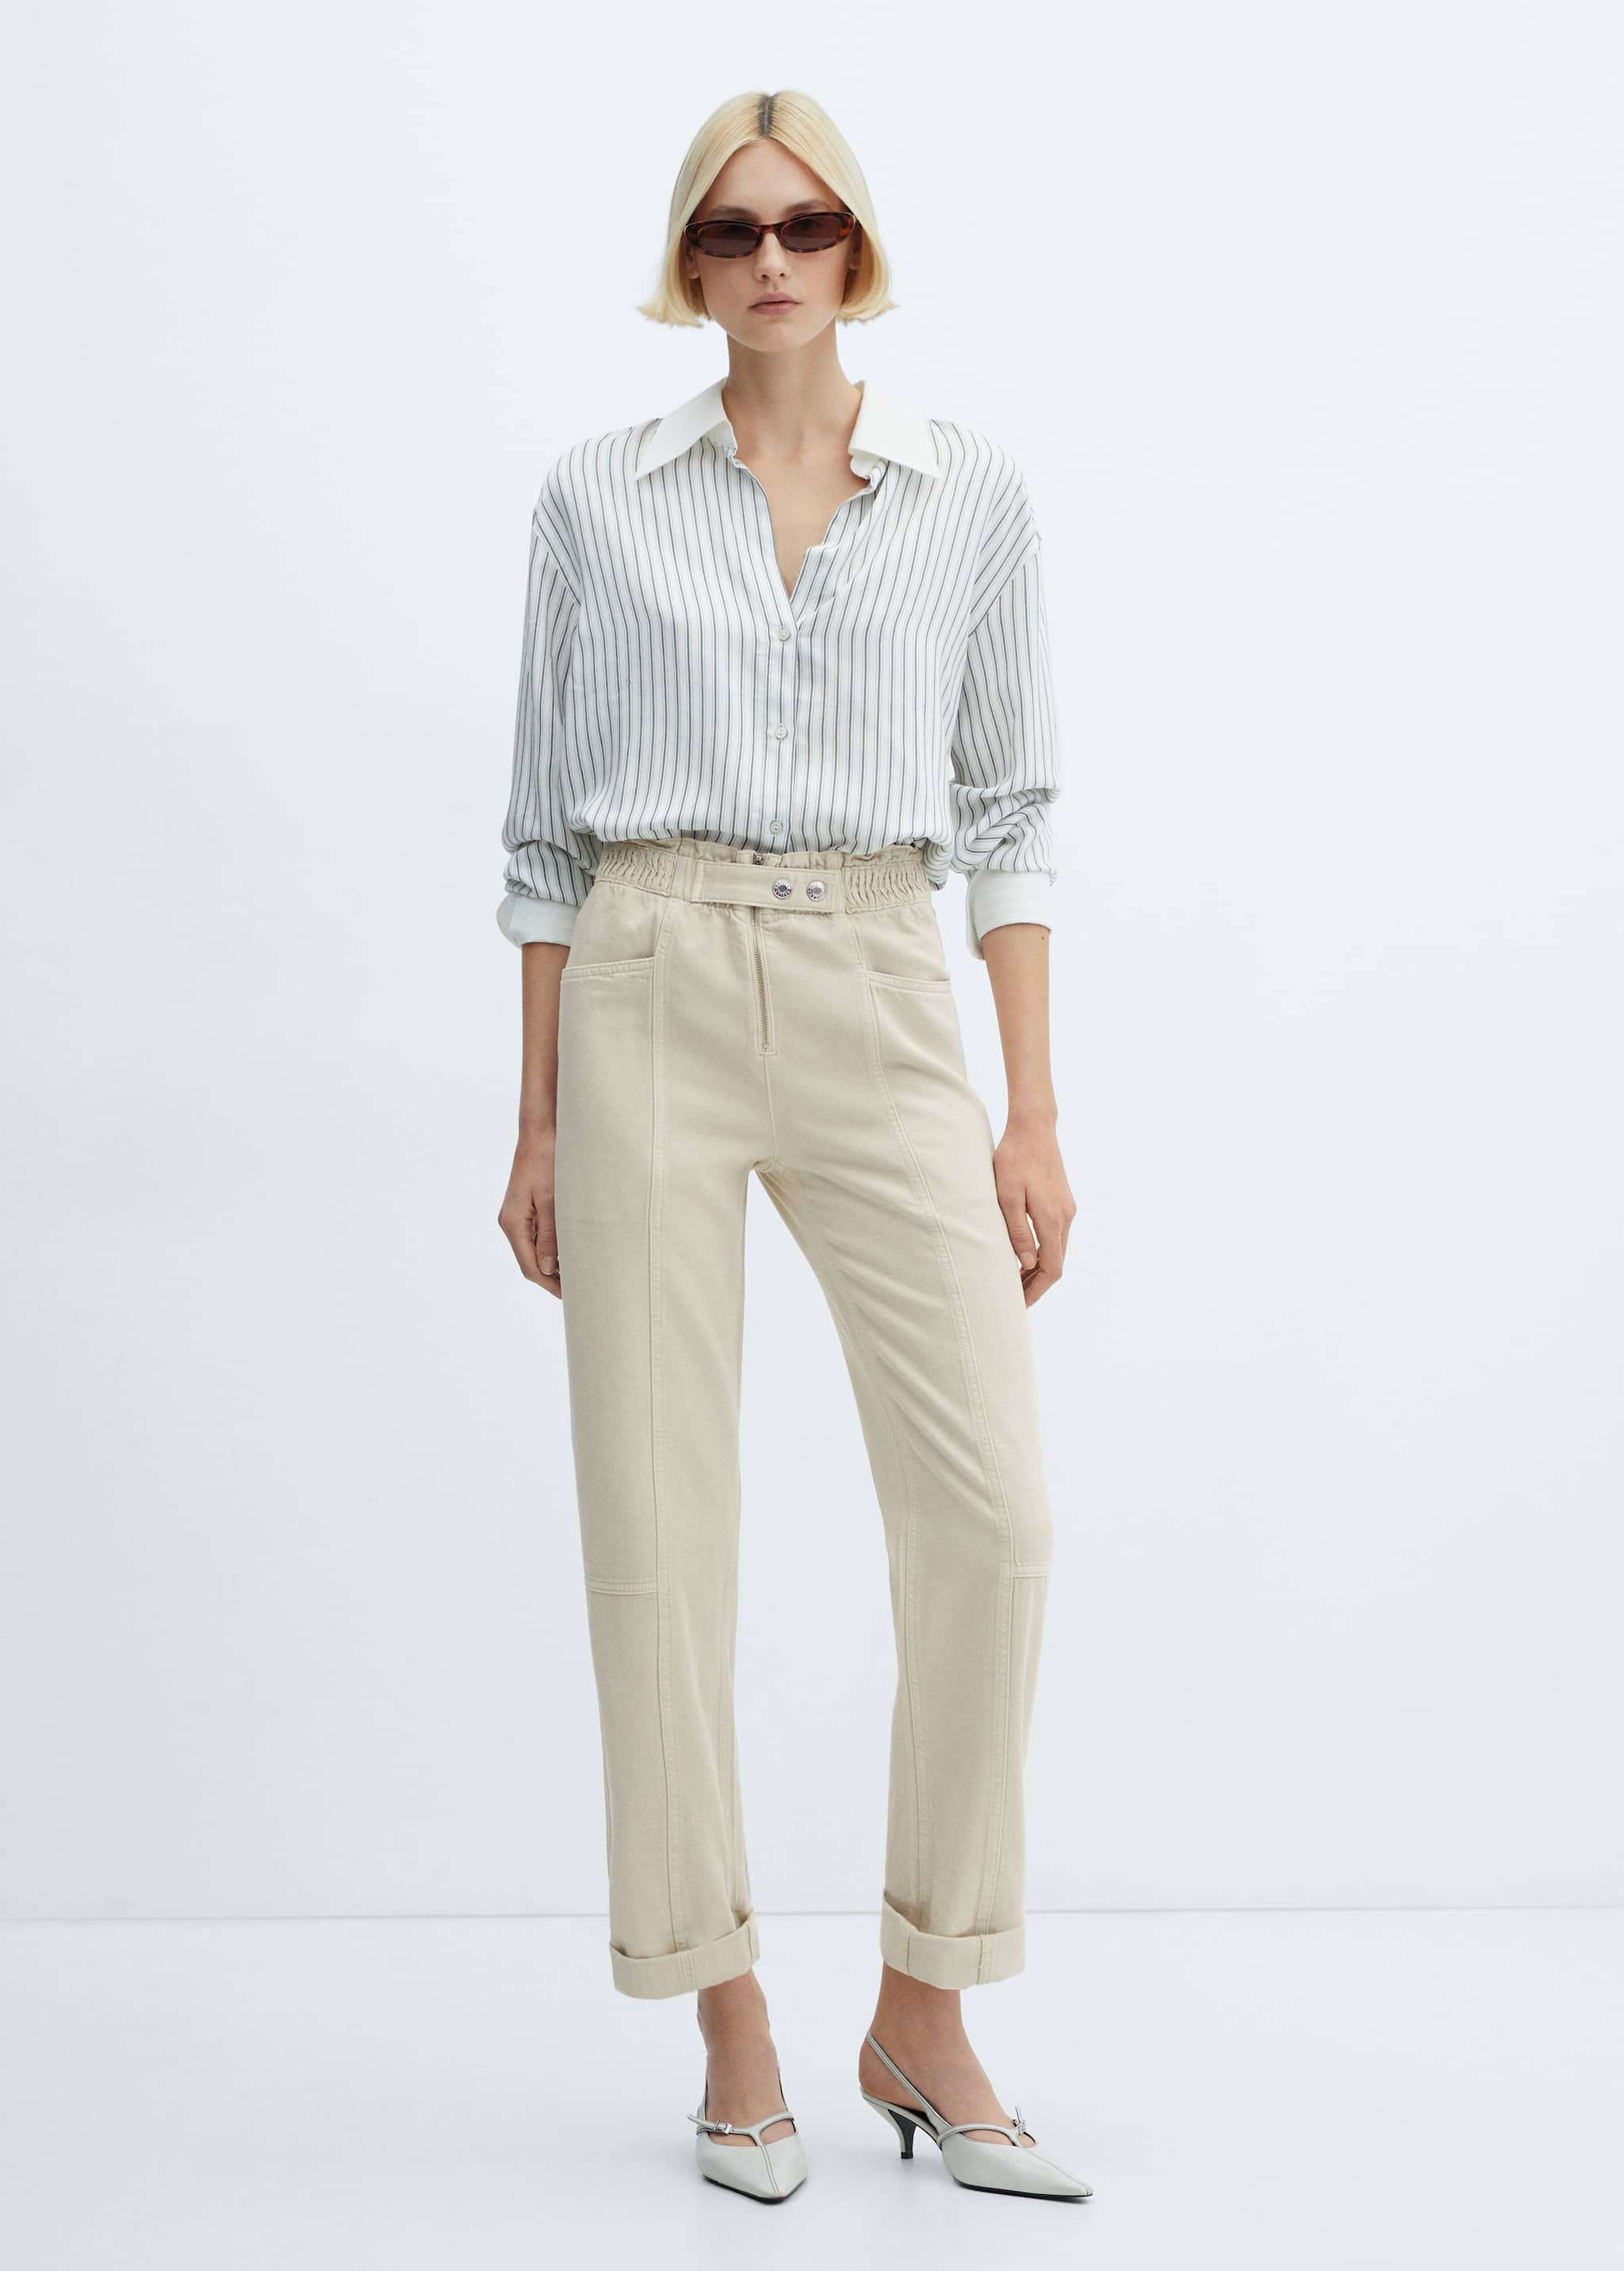 Slouchy jeans with elastic waist - General plane